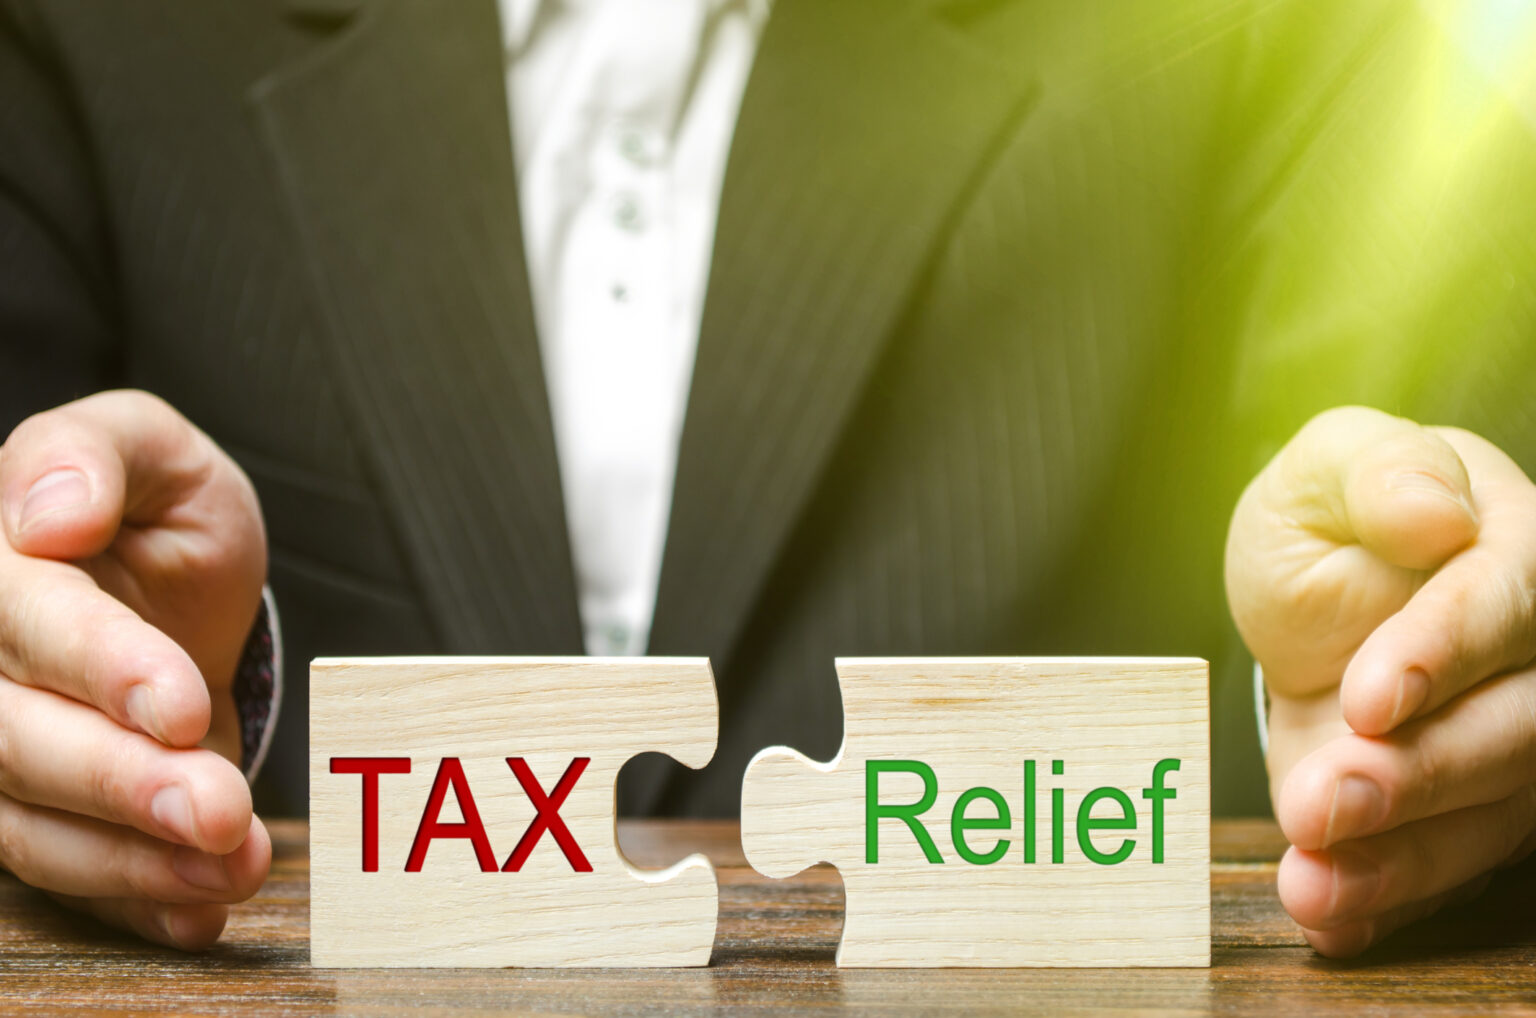 Claim tax relief
